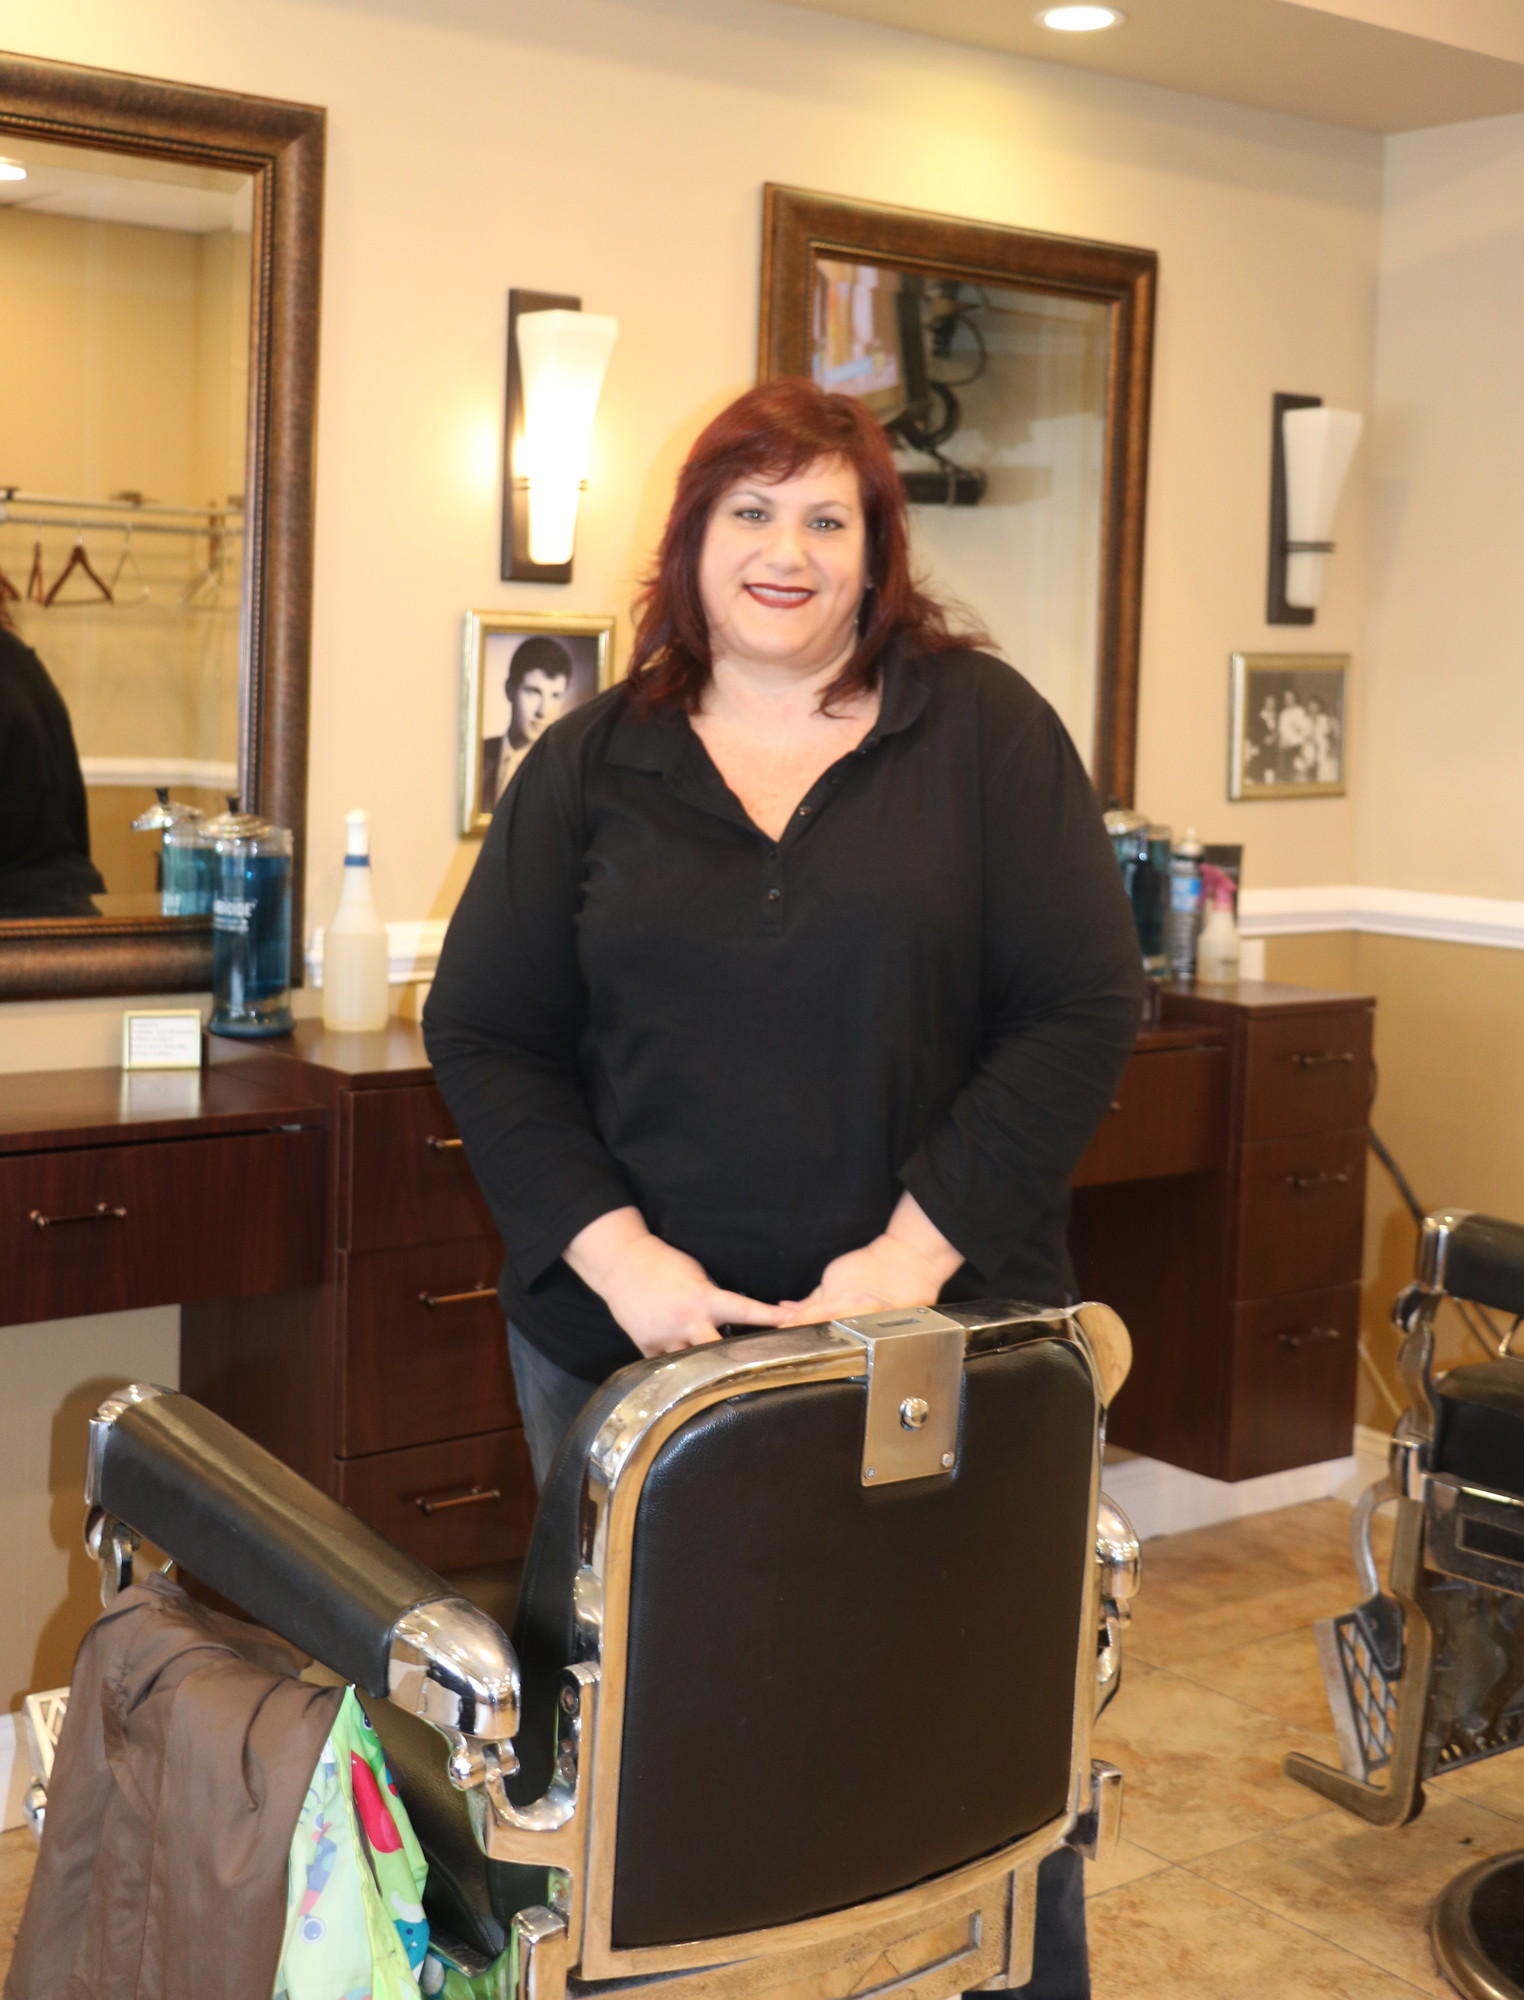 Ioannou styles hair for both men and women in the shop,
located at 34 Church St. in Malverne.